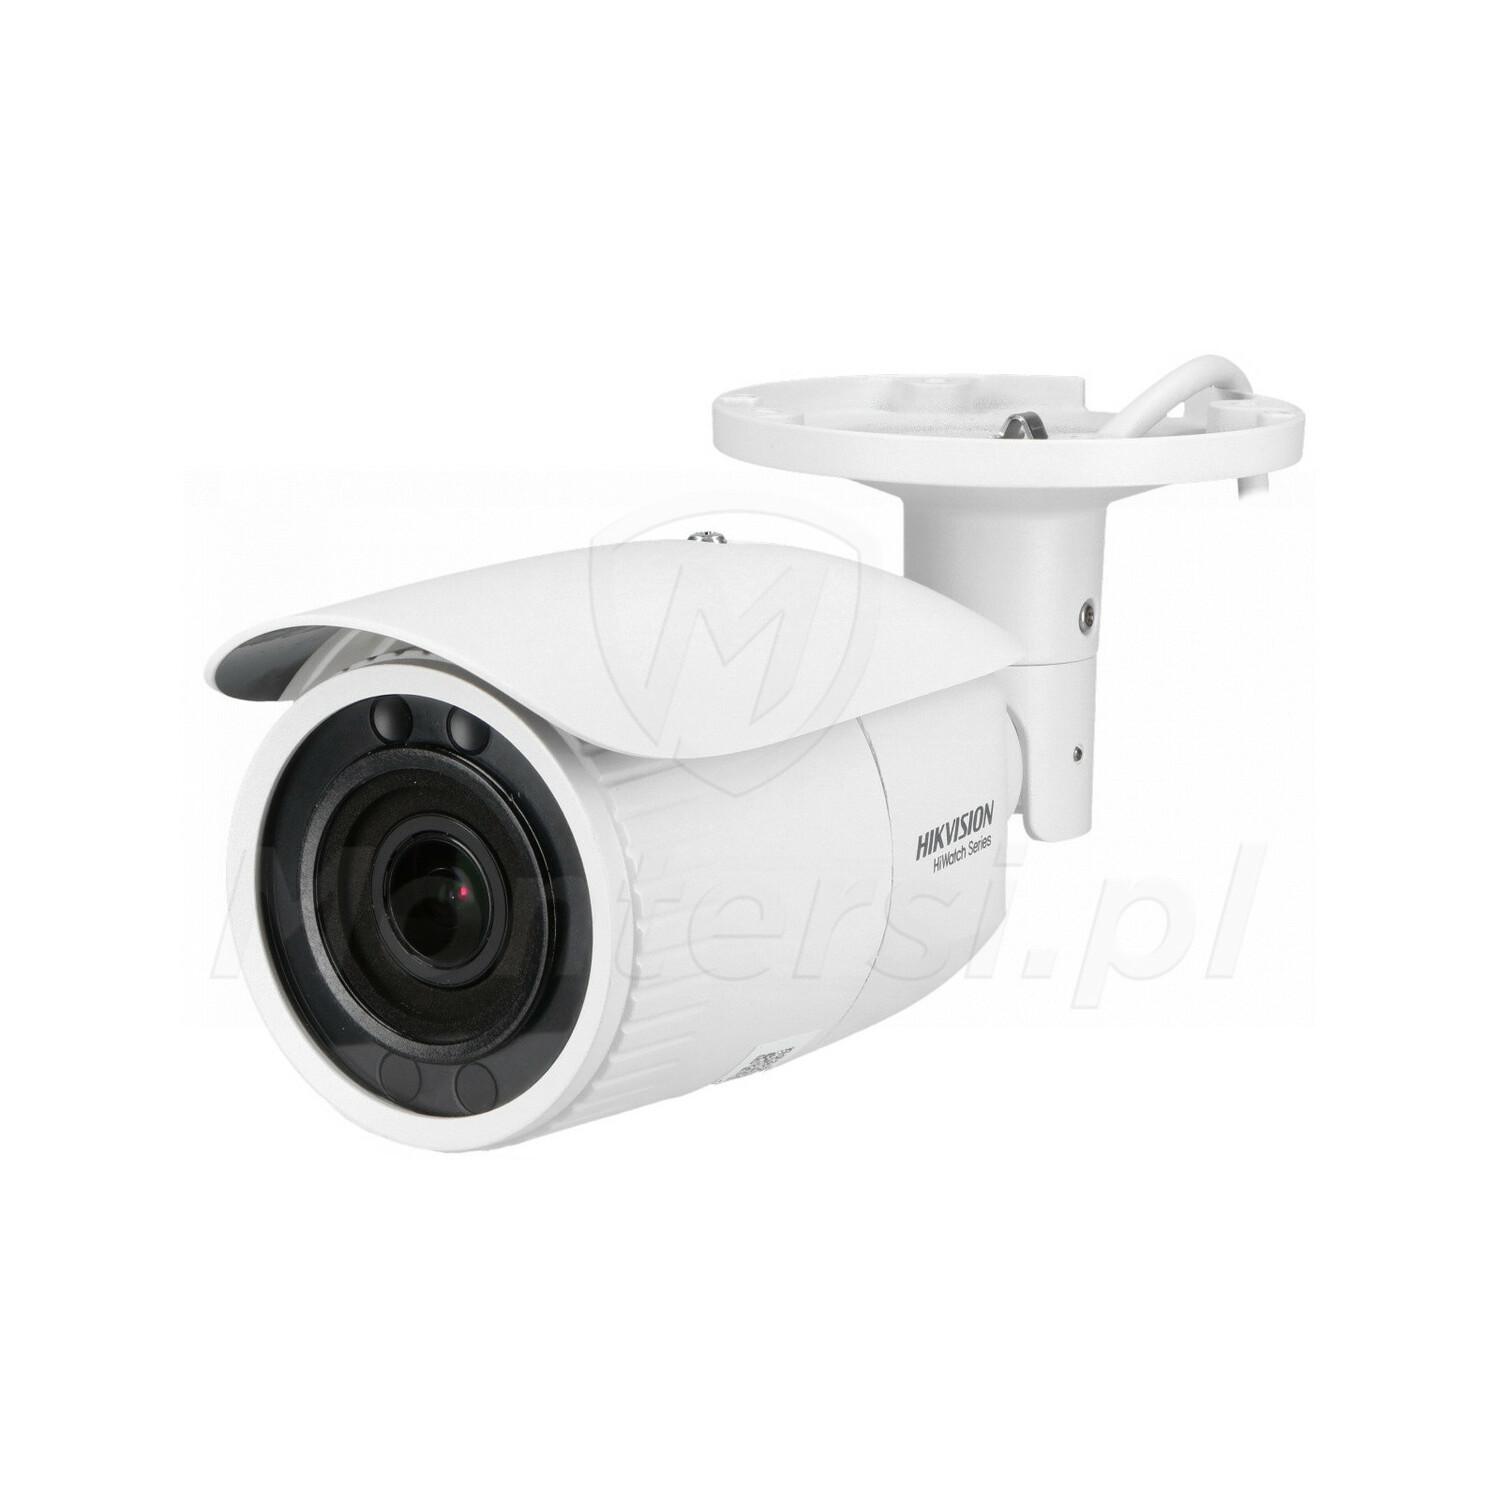 <p><span style="font-weight: bold; font-style: italic;">HIKVISION&nbsp; -&nbsp;</span><span style="color: inherit; font-family: inherit; font-size: 20px; font-weight: inherit; background-color: initial;">291.02лв</span></p>